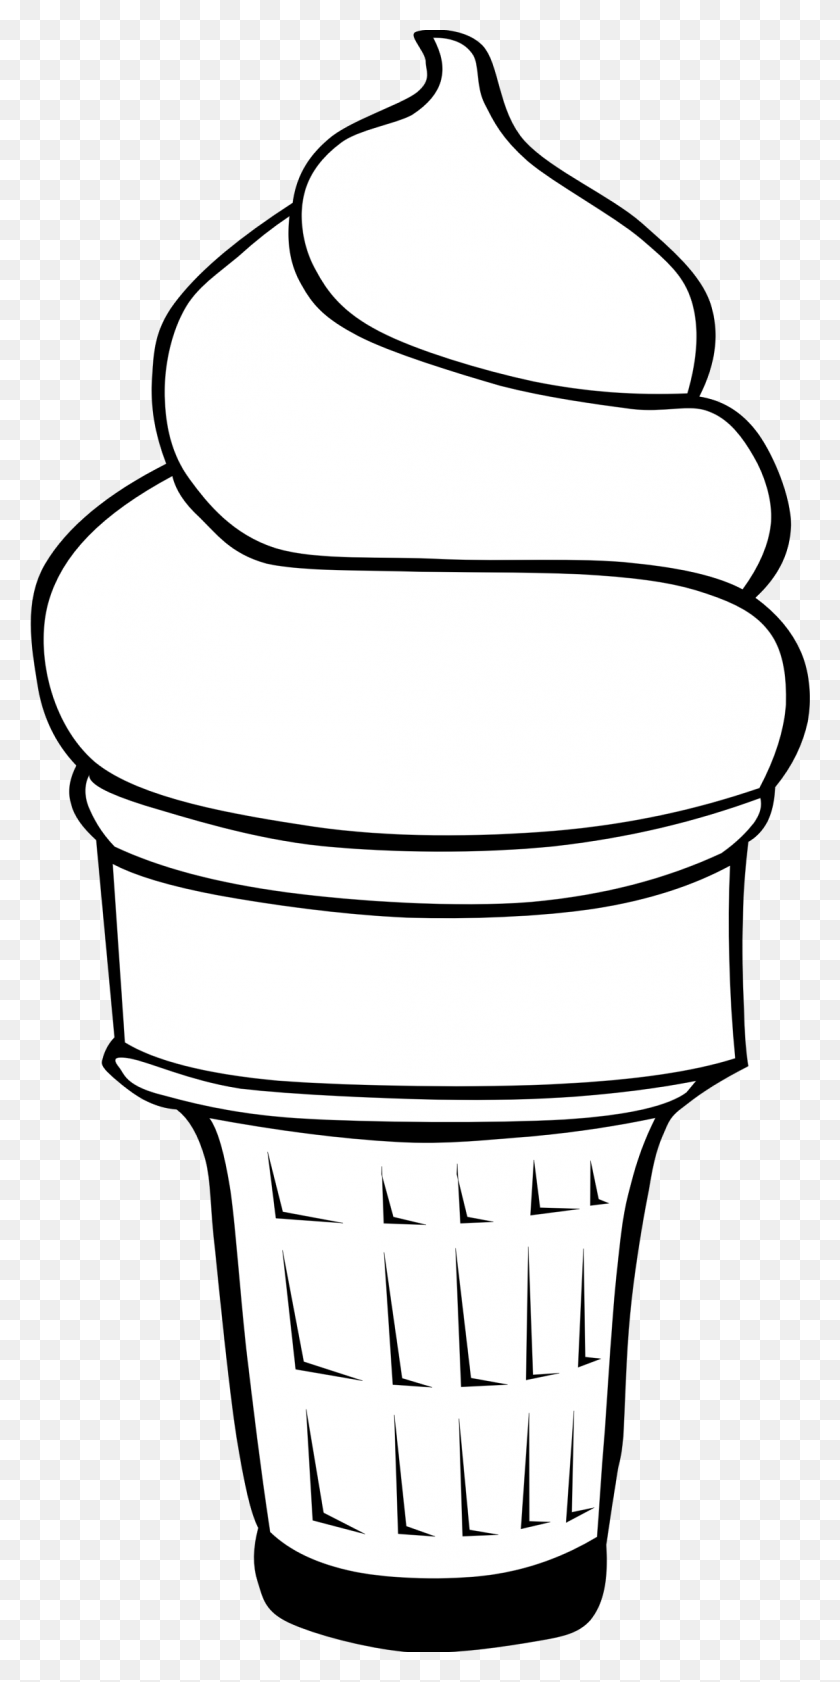 1154x2400 Icecream Cone Png Black And White Transparent Icecream Cone Black - Basketball Net Clipart Black And White